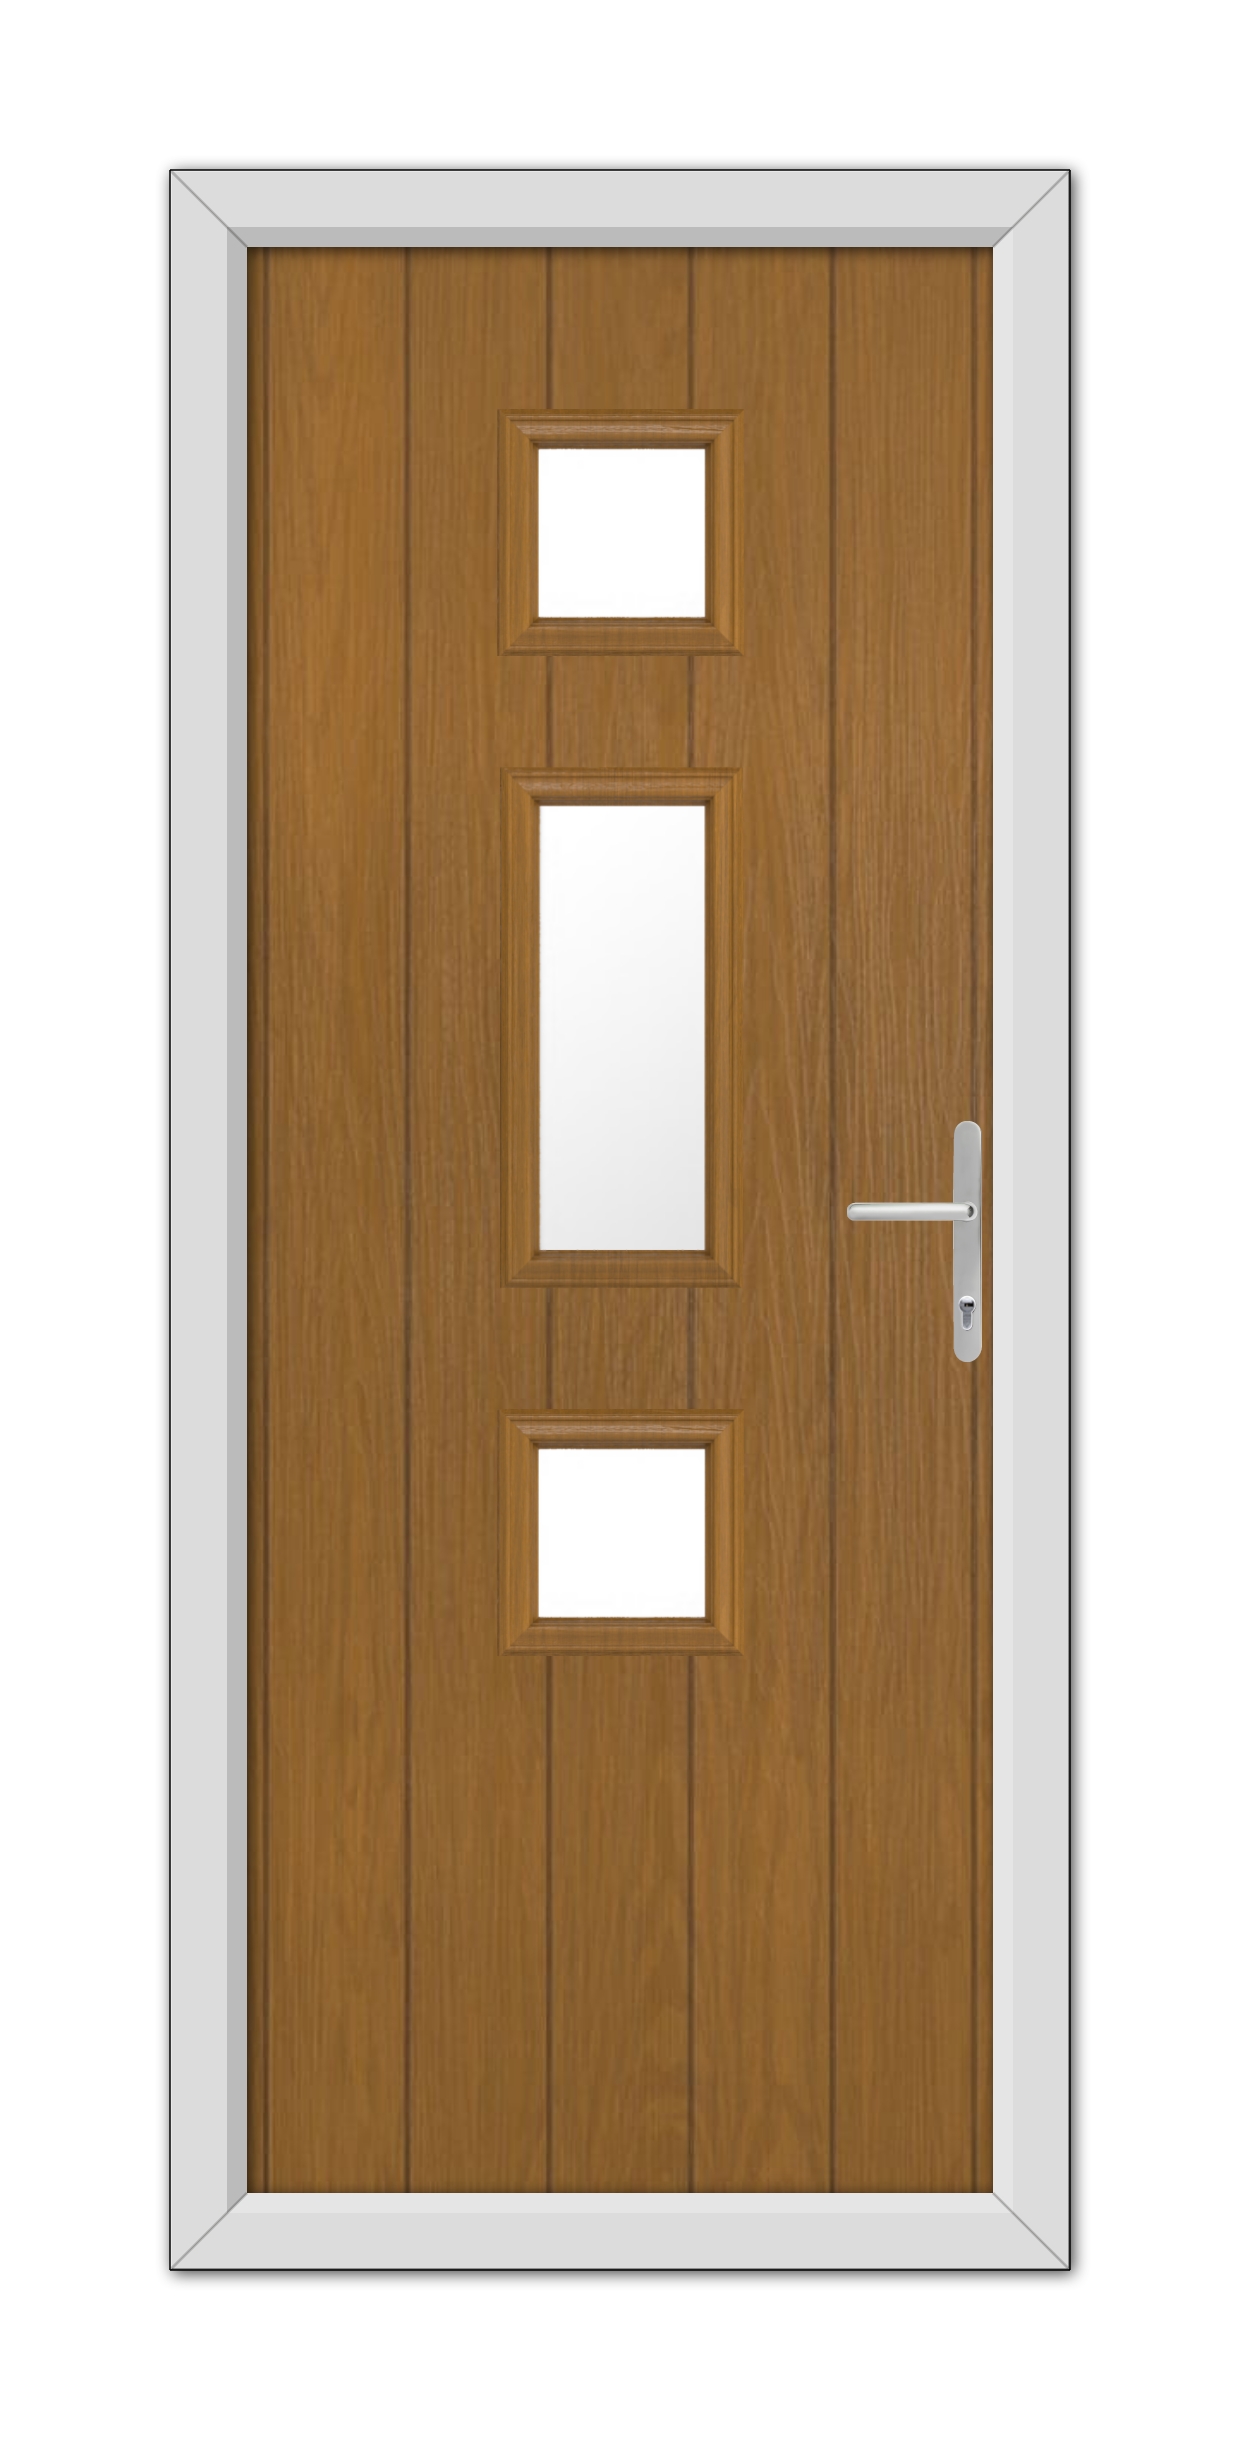 A modern Oak York composite door with three rectangular glass panels and a metal handle, set within a white frame.